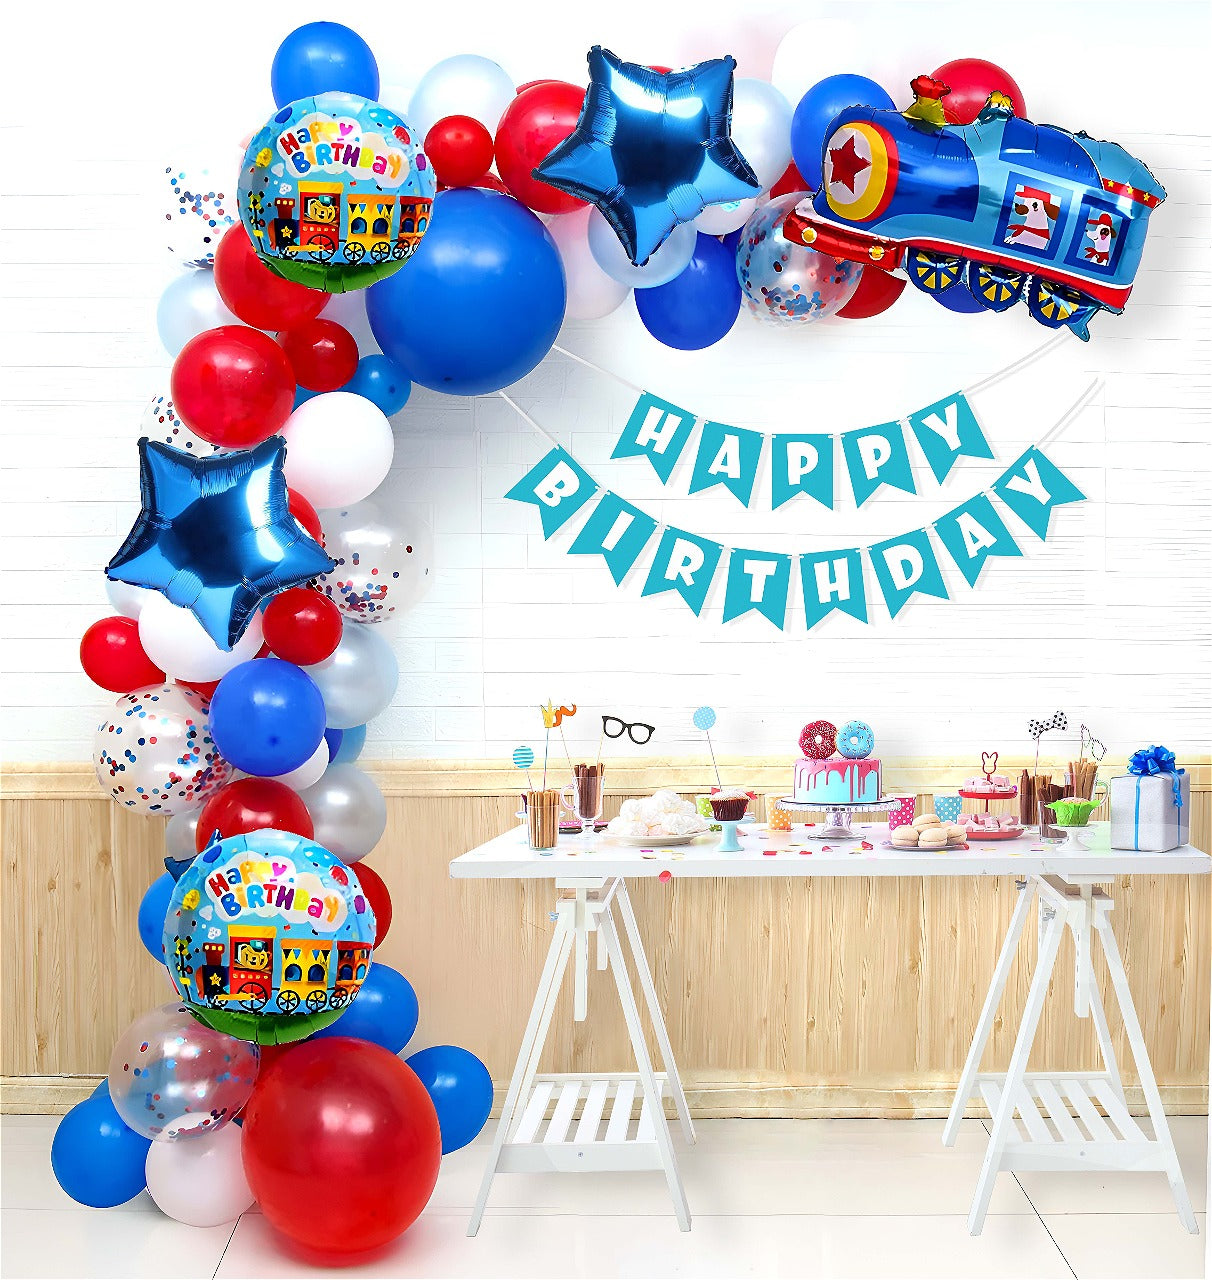 Celebrate your Little One's B'day with this kit